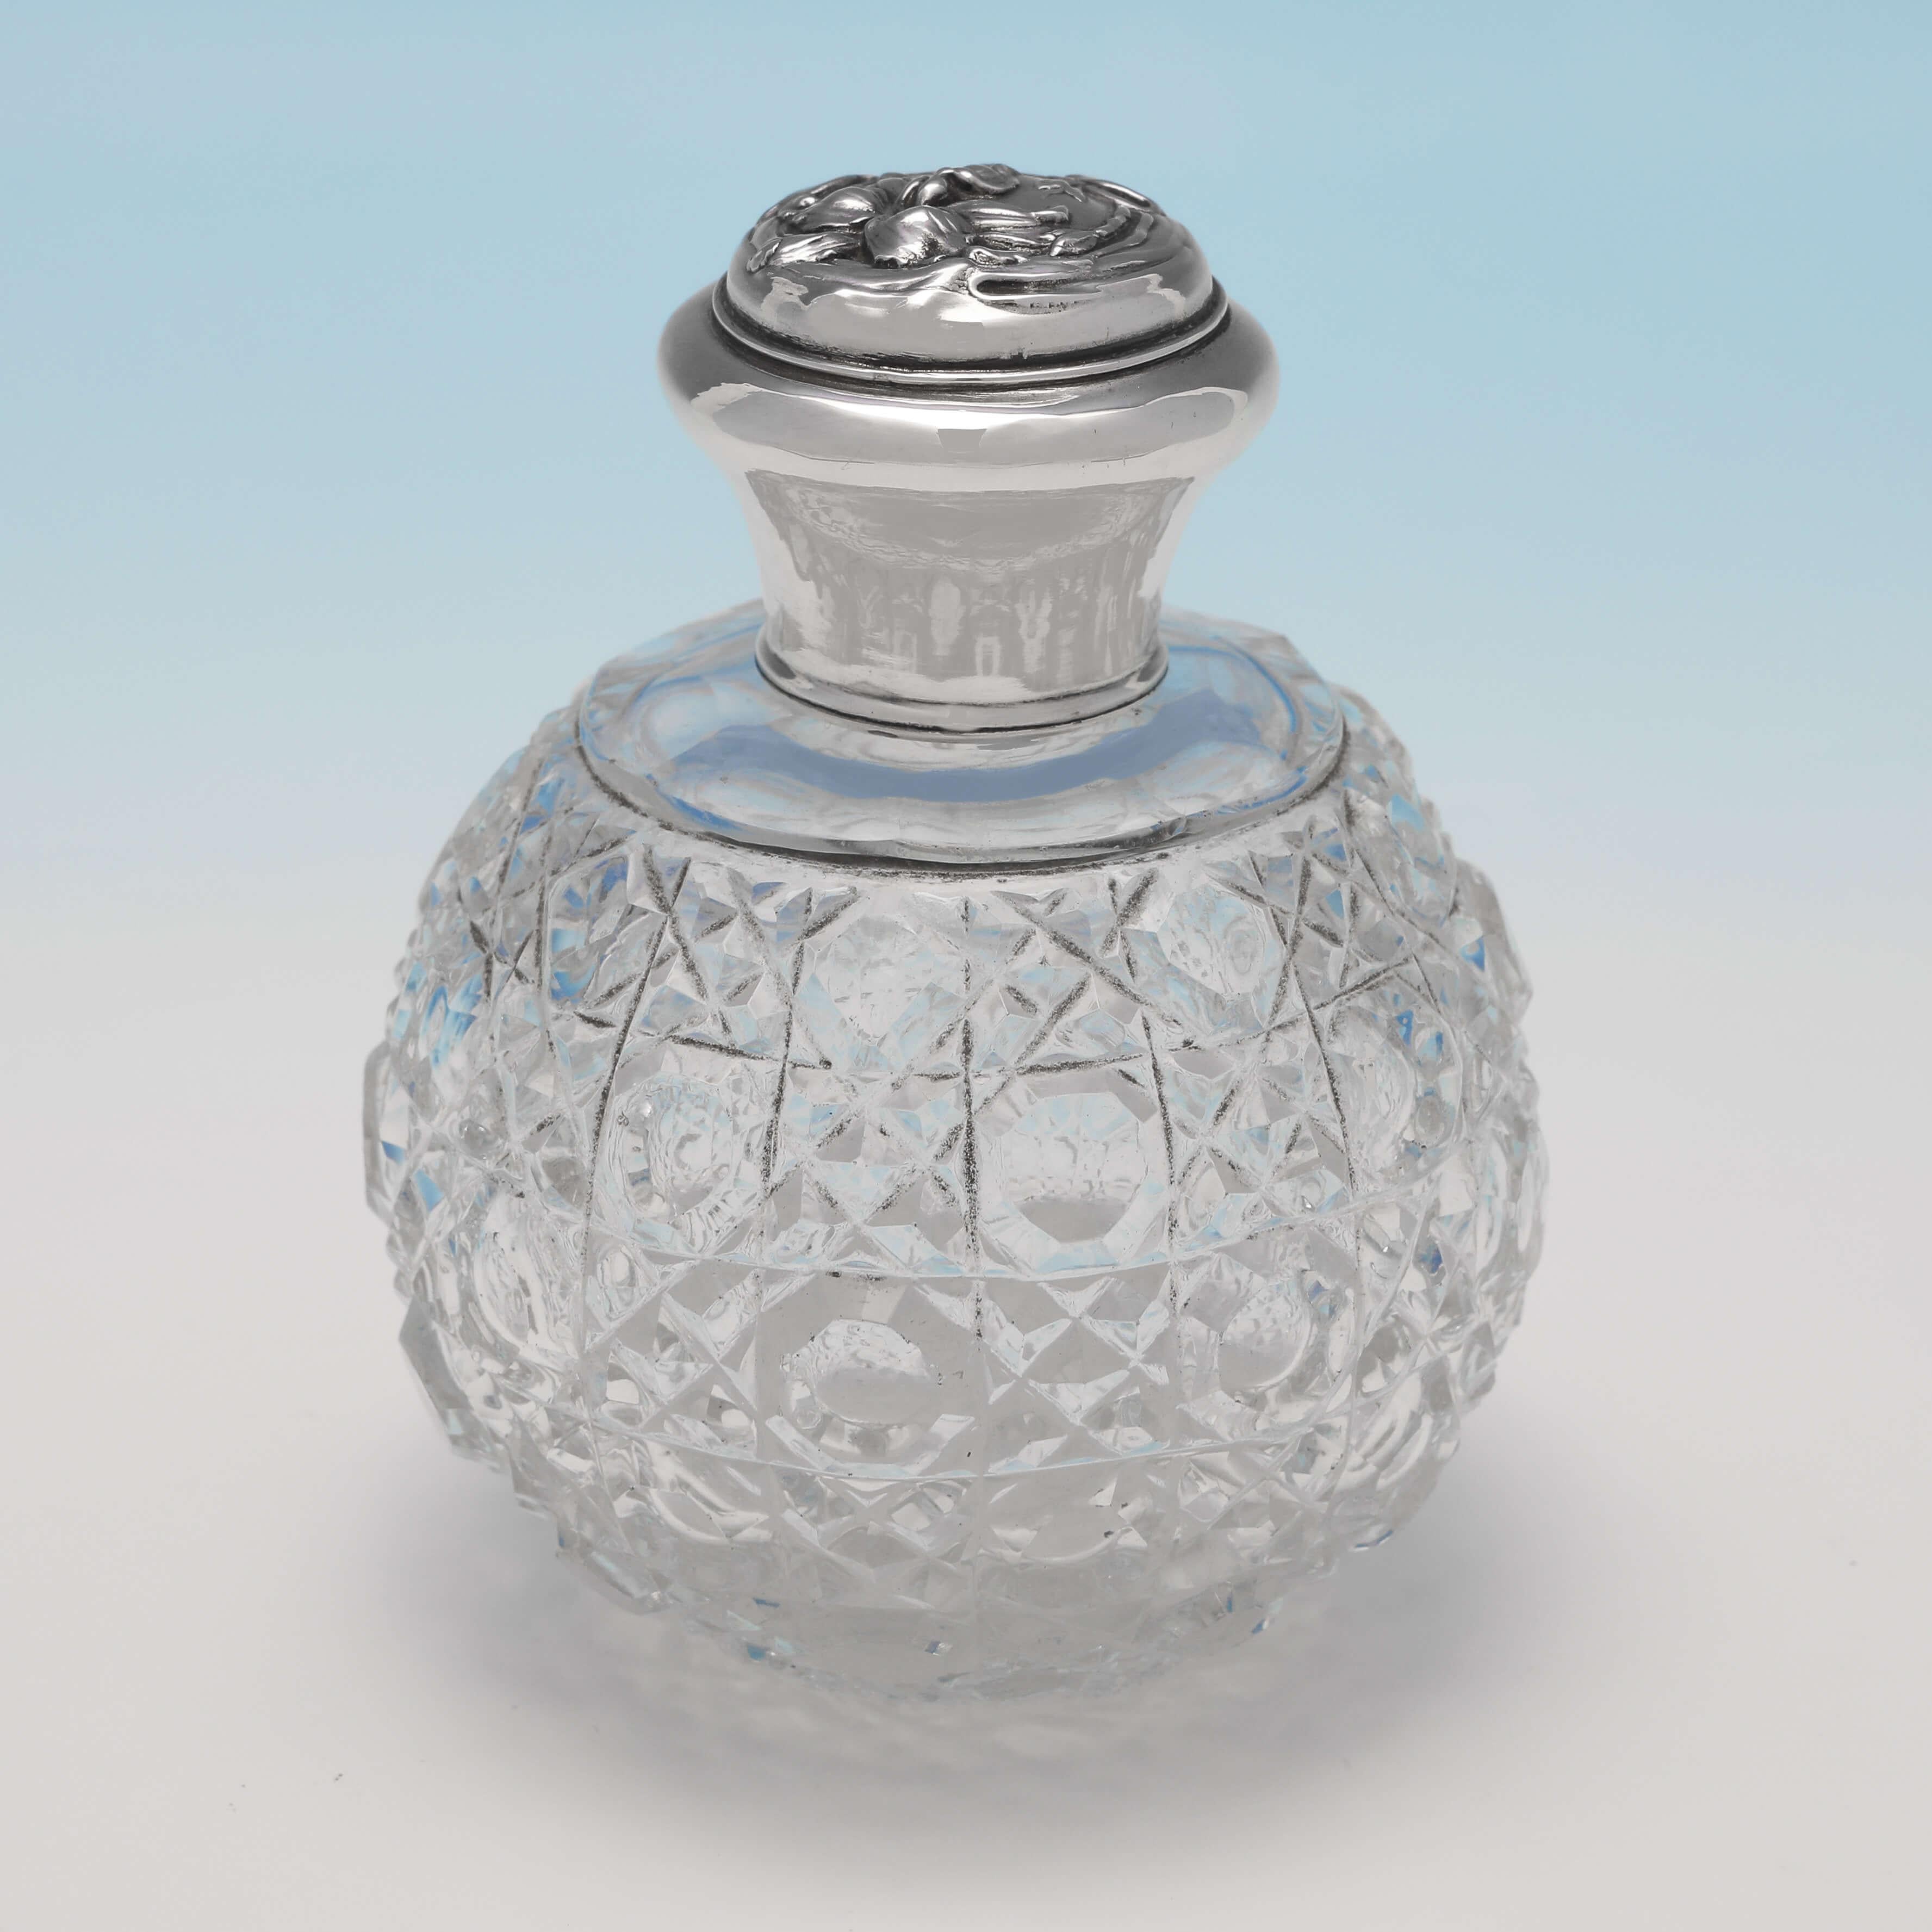 Hallmarked in Birmingham in 1908 by Thomas Bishton, this attractive pair of Edwardian, Antique Sterling Silver Scent Bottles, features hobnail cut glass bodies, and art nouveau design silver lids. Each scent bottle measures 3.75